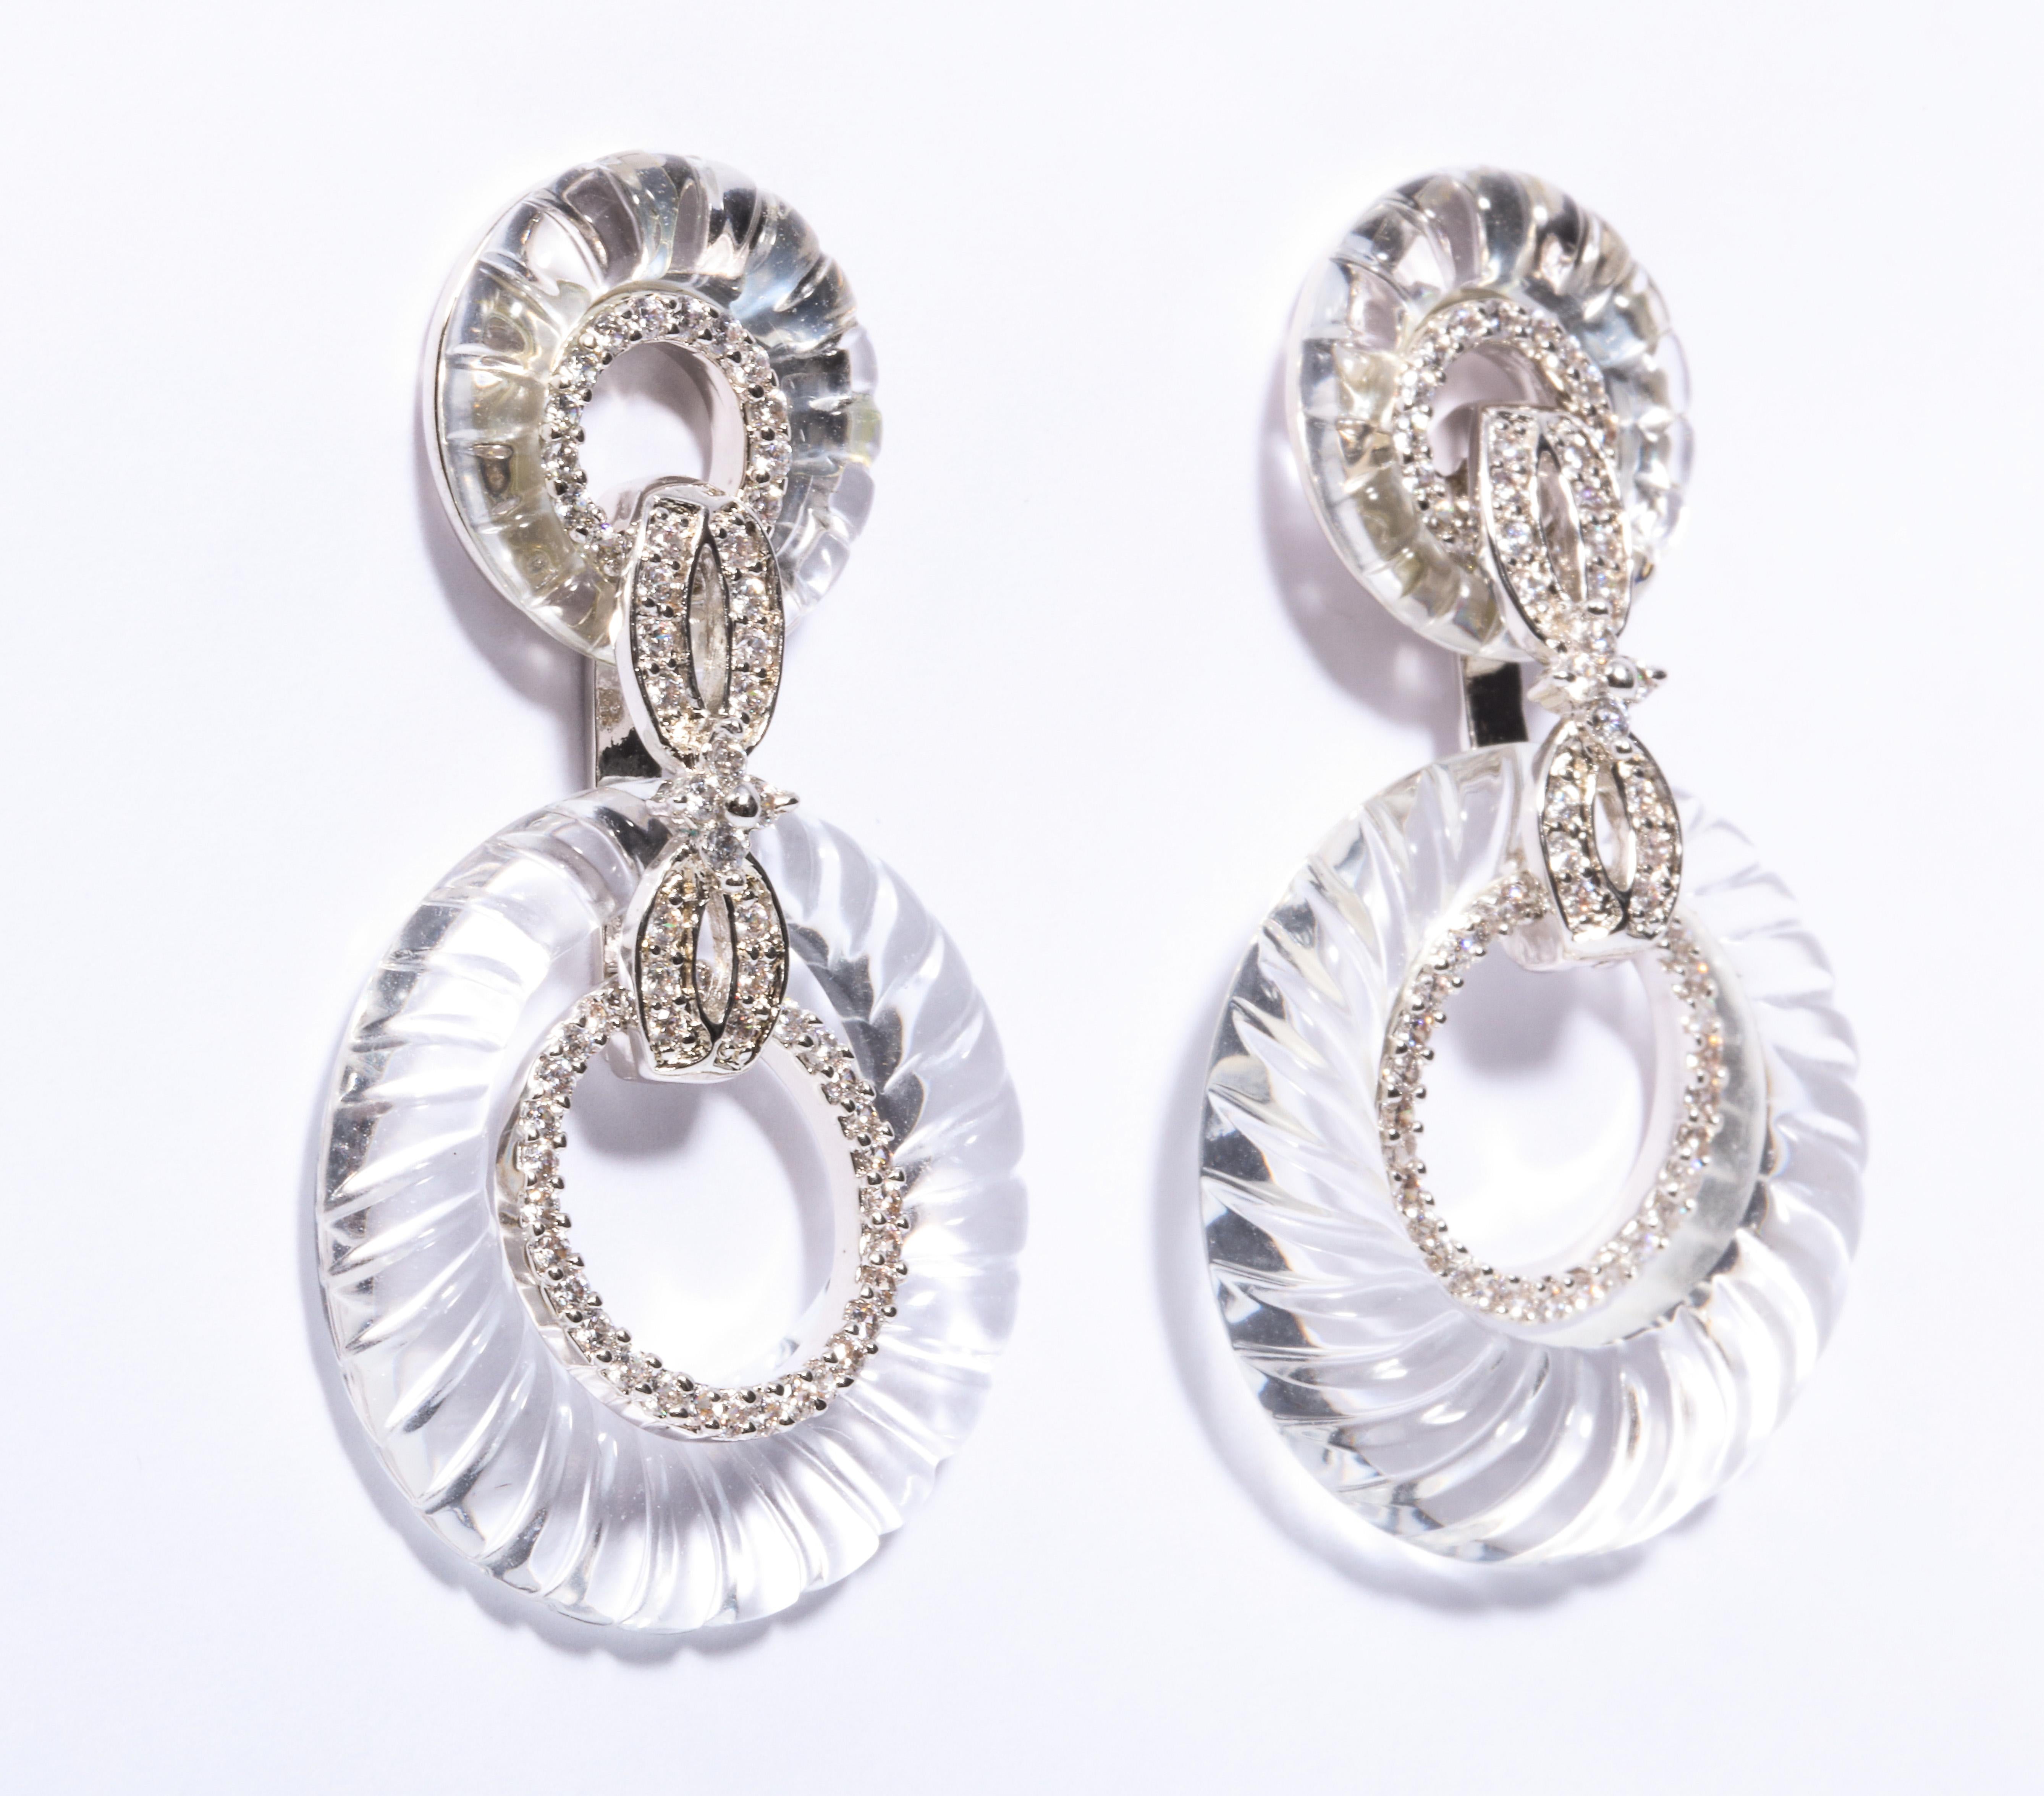 Magnificent Costume Jewelry Art Deco Style Faux Diamond Rock Crystal Resin Hoop Earrings post only 2 inches long by 1 inch wide.